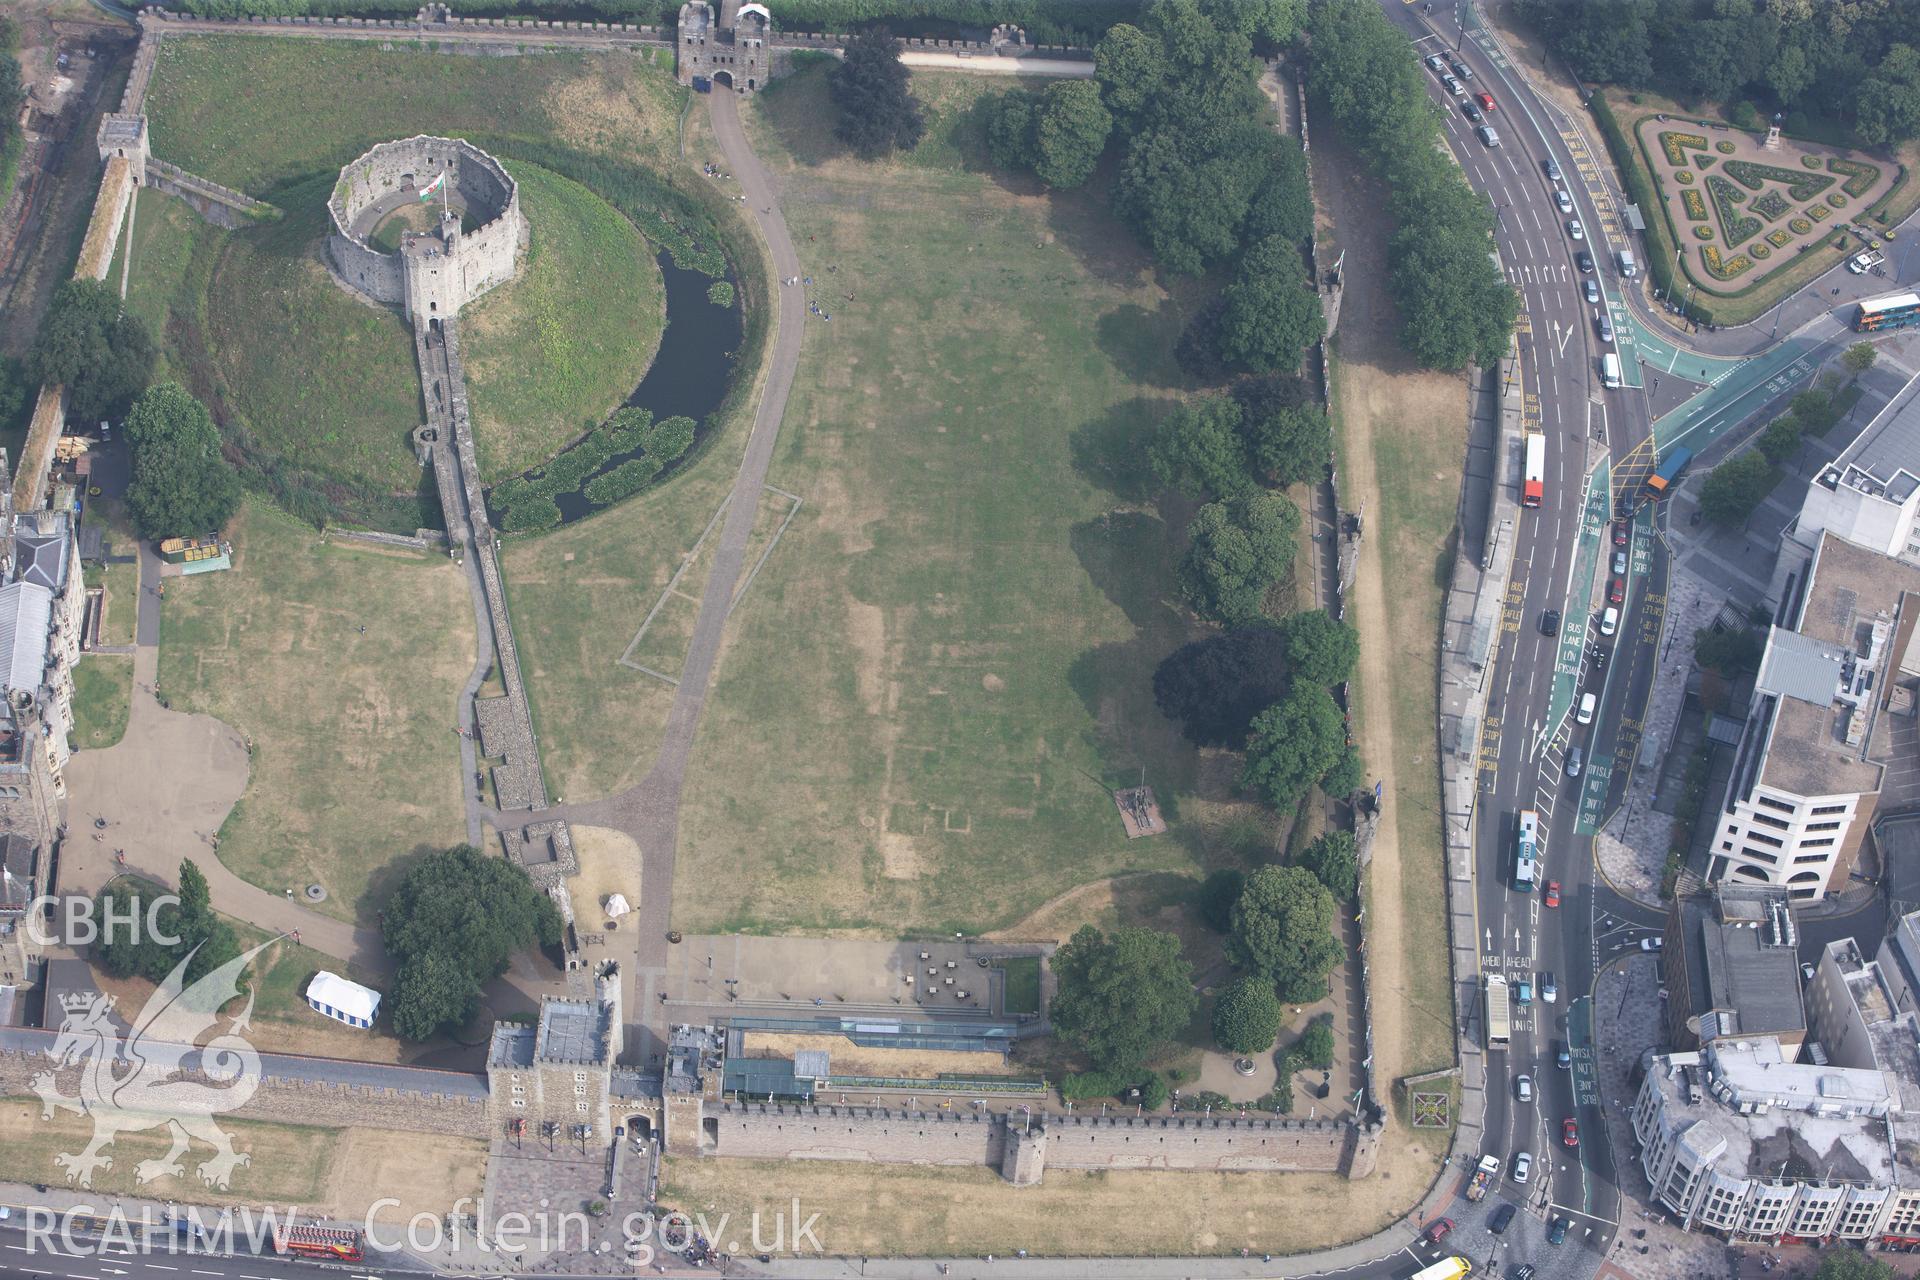 Royal Commission aerial photography of Cardiff Castle taken during drought conditions on 22nd July 2013, showing internal parchmarks.